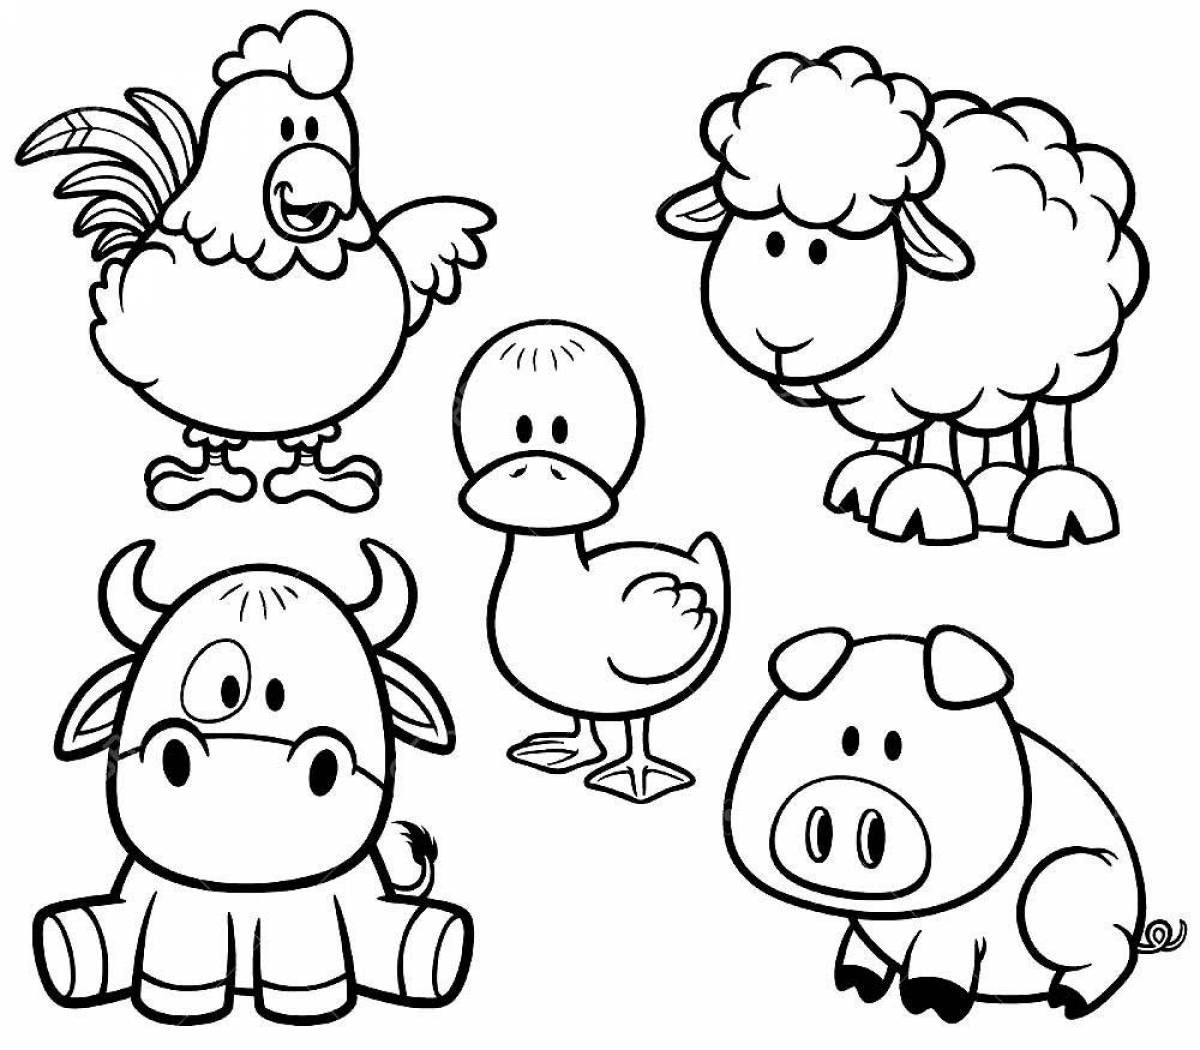 Fabulous pet coloring pages for 4-5 year olds